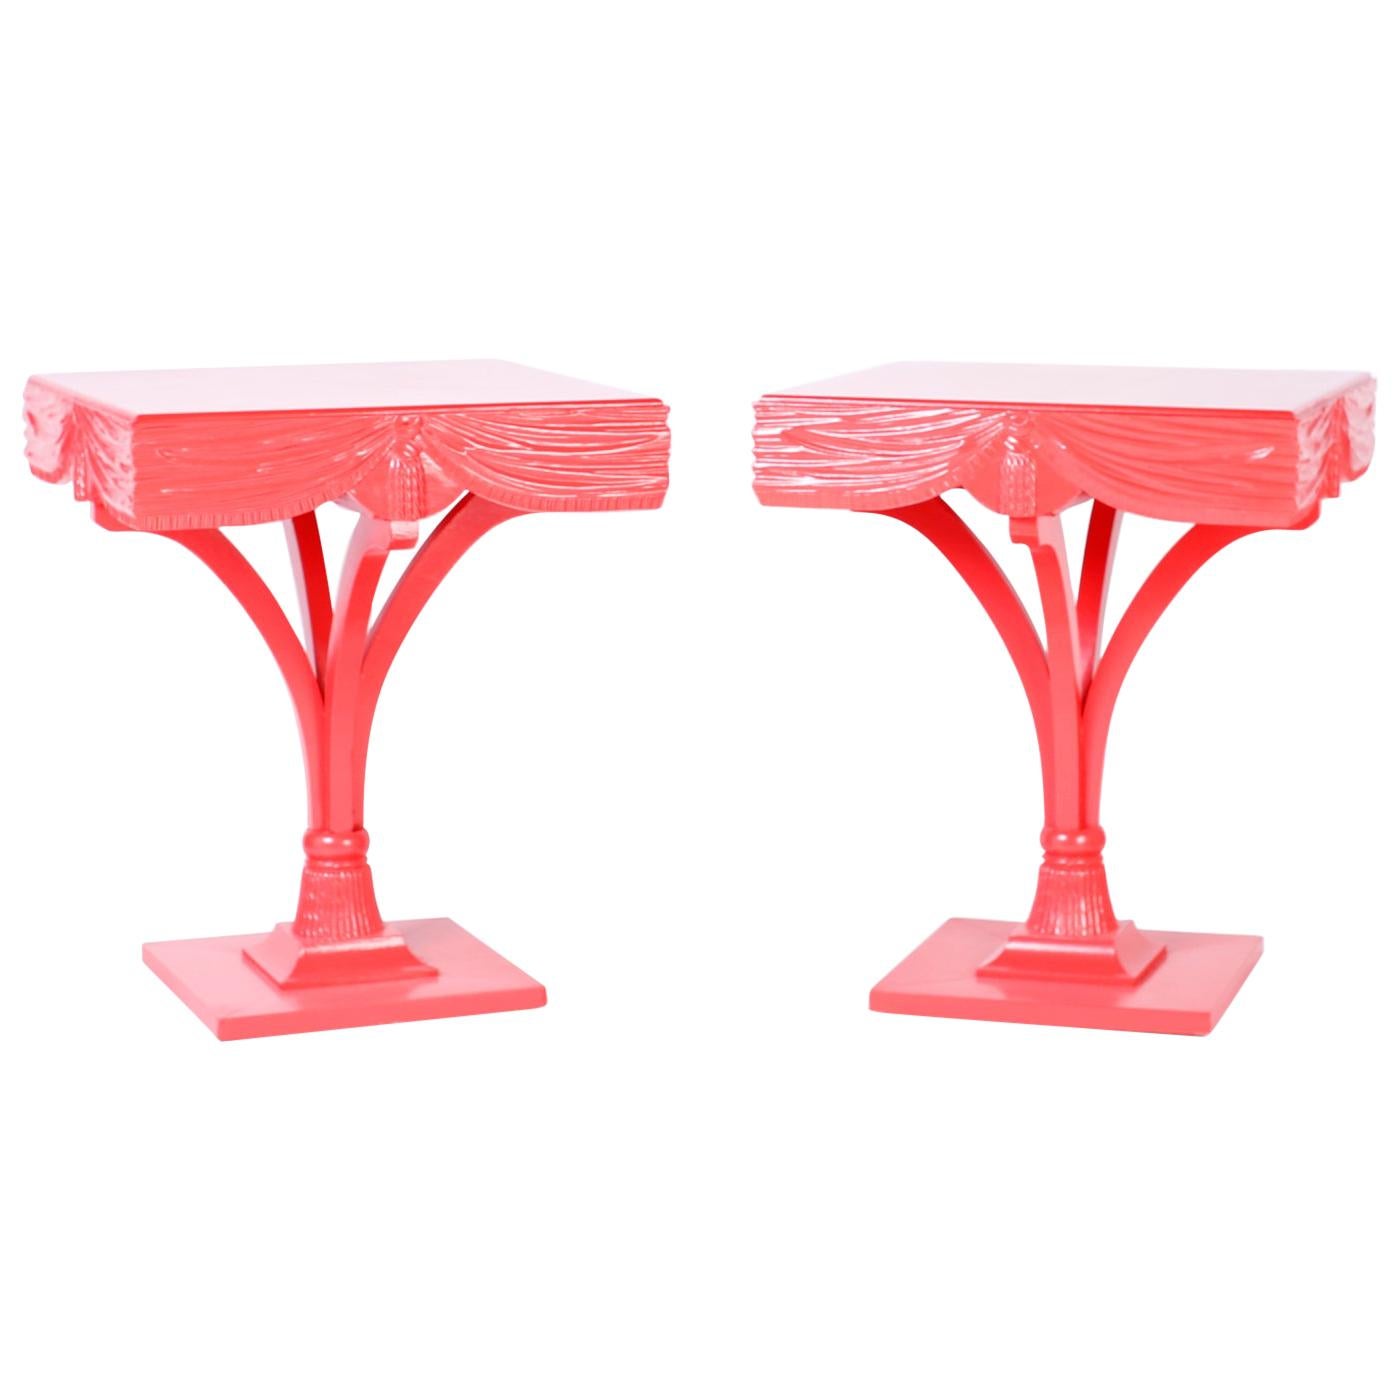 Pair of Midcentury Coral Lacquered Regency Side Tables